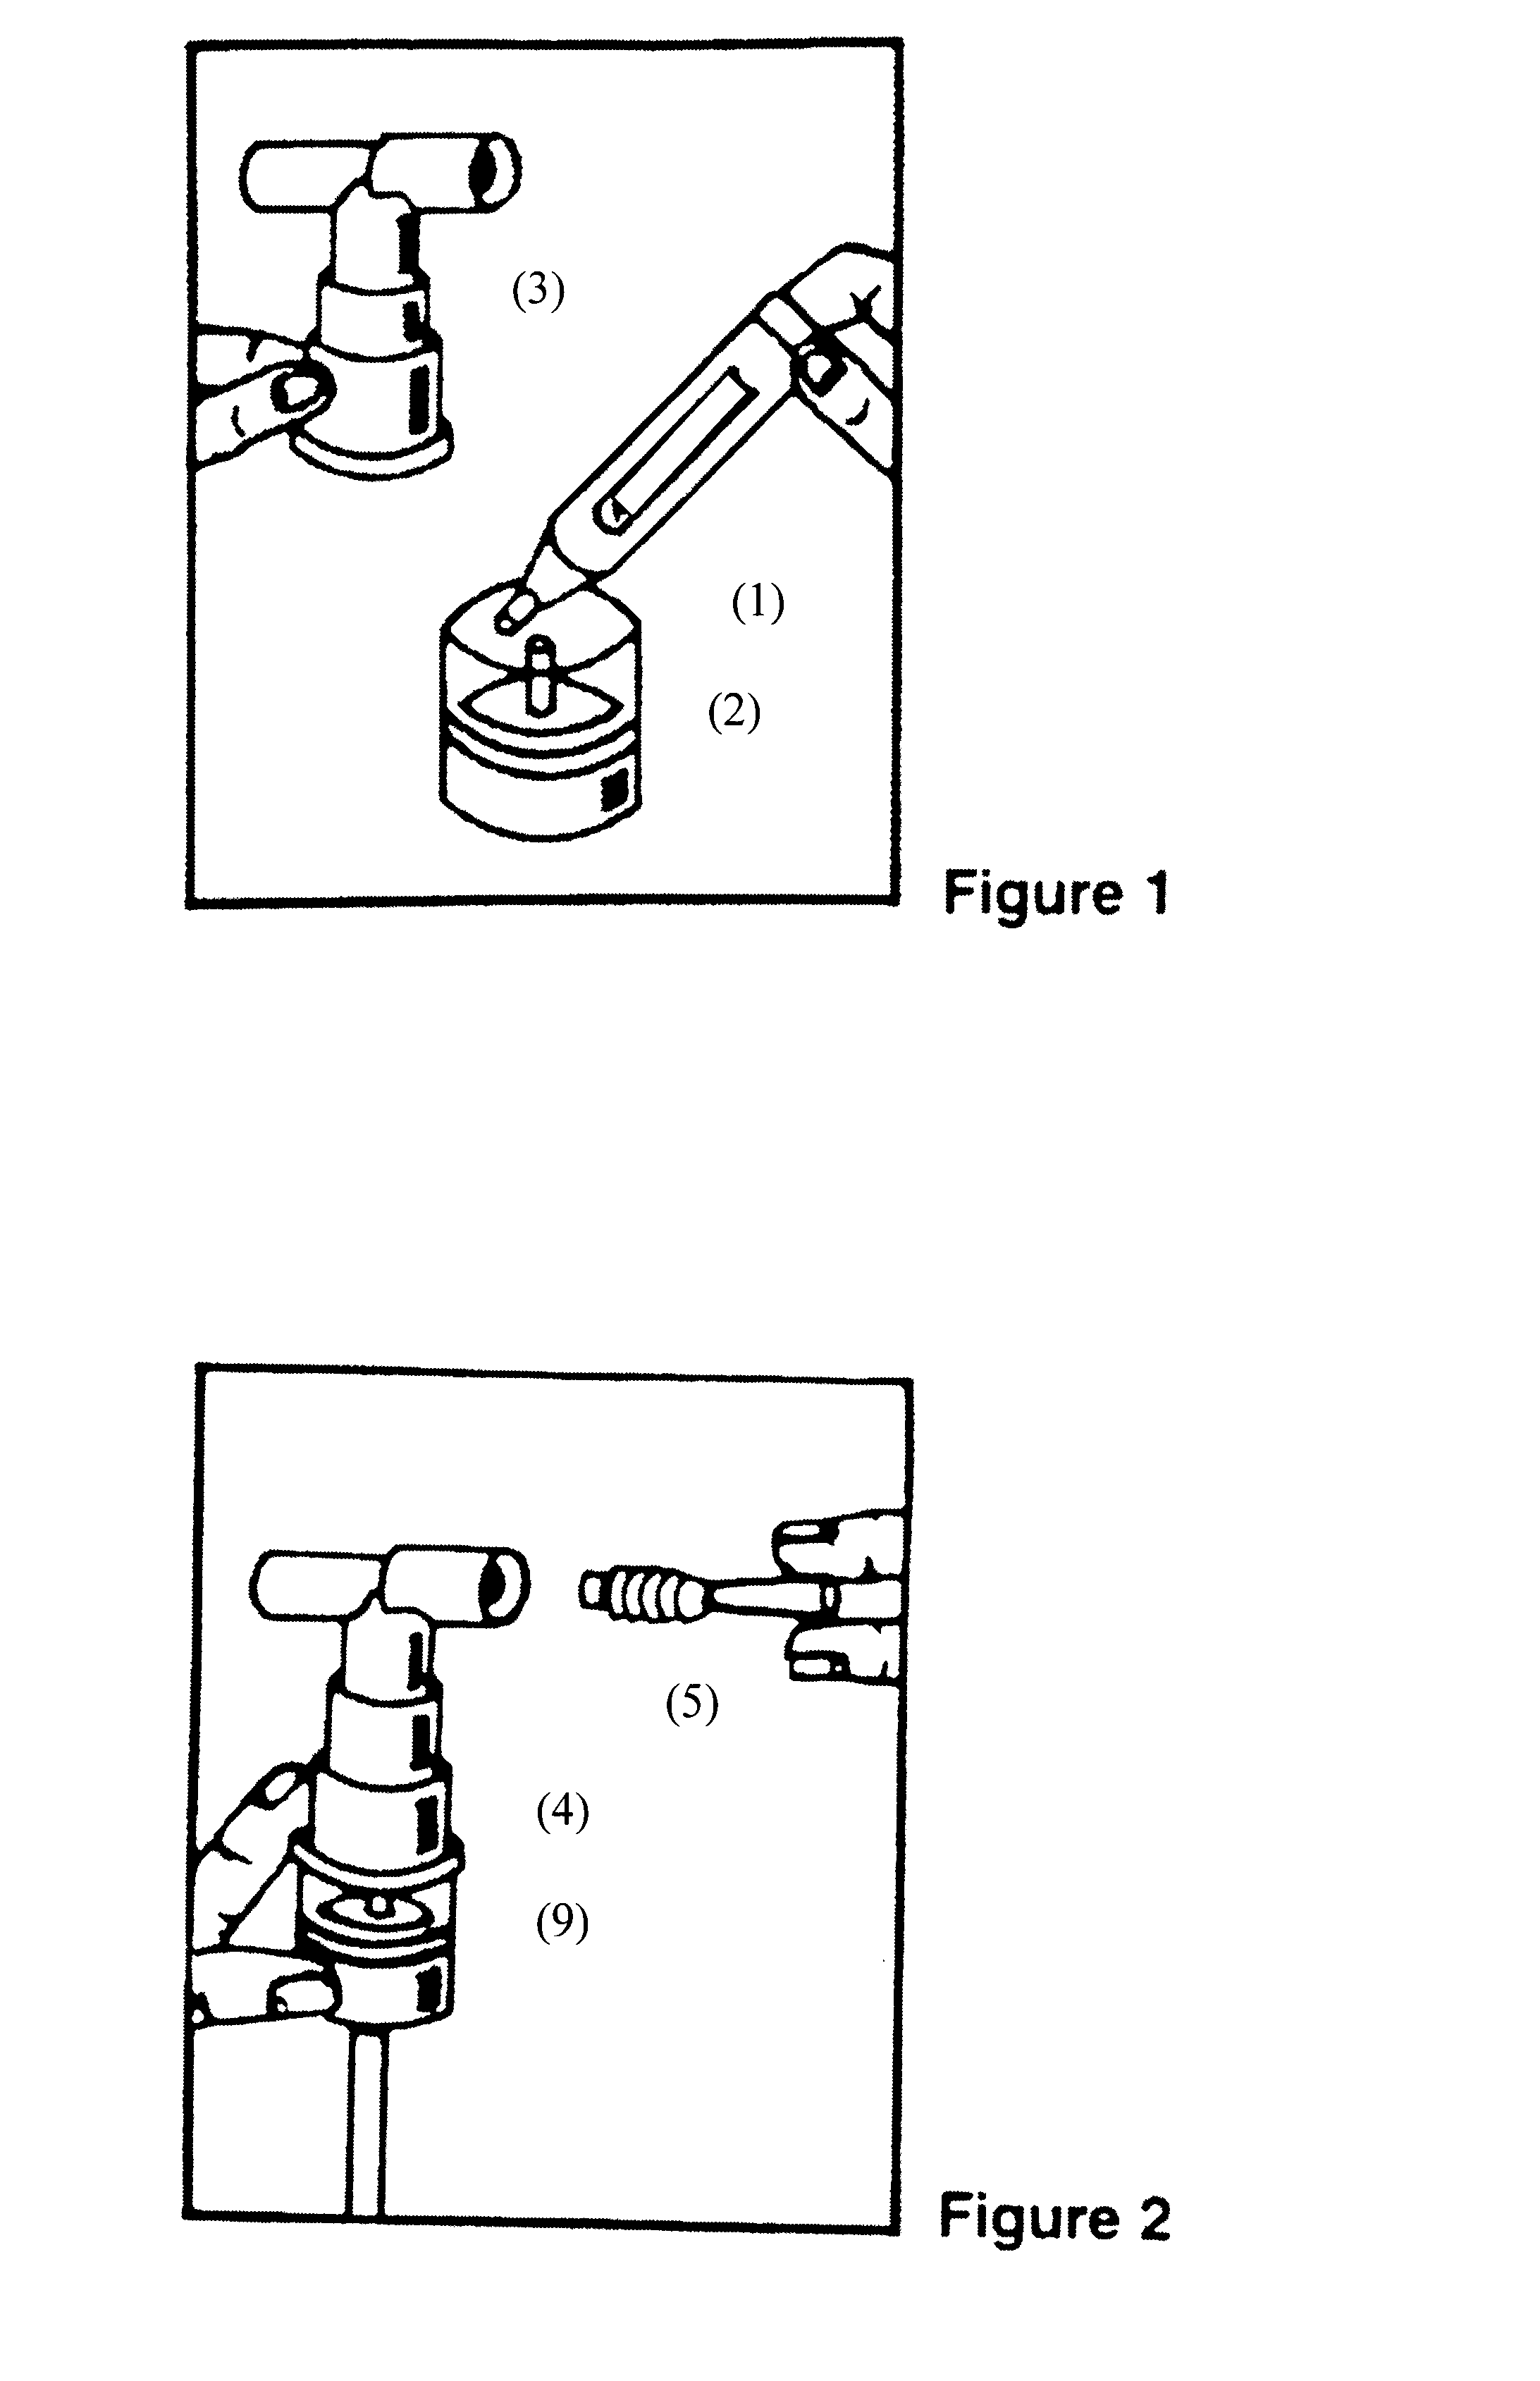 Albuterol and ipratropium inhalation solution, system, kit and method for relieving symptoms of chronic obstructive pulmonary disease